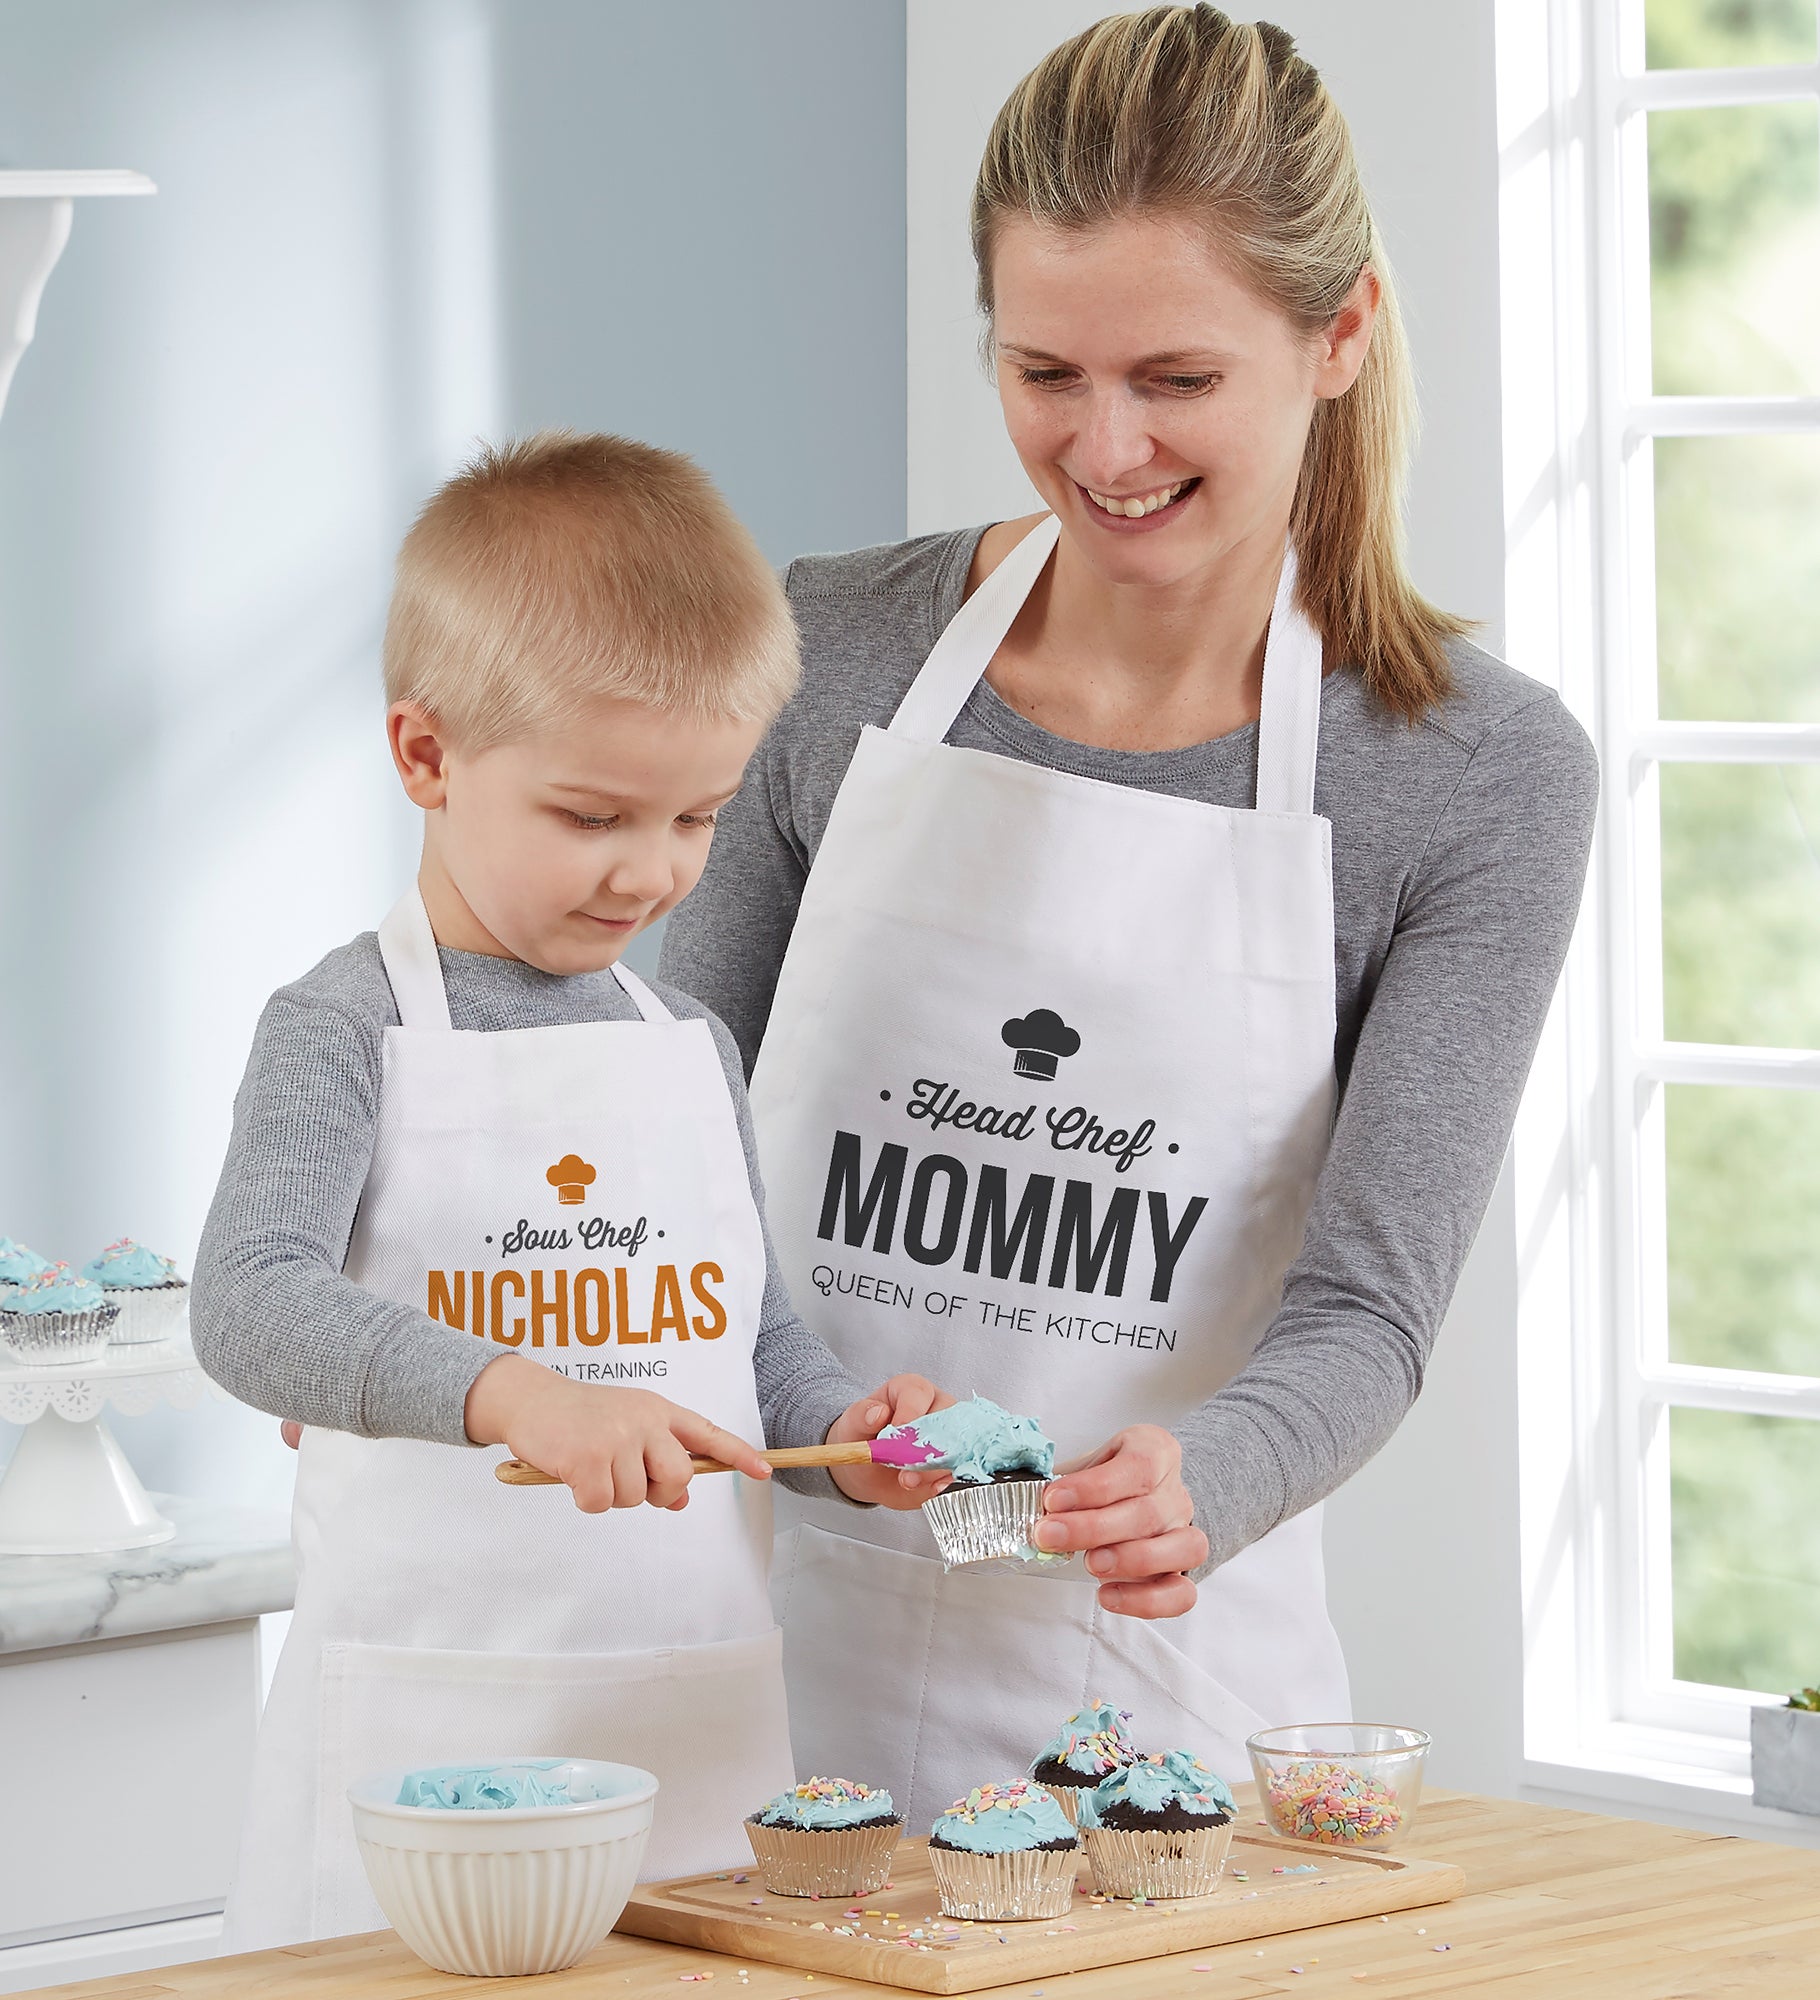 Chef & Junior Chef Personalized Aprons & Potholders